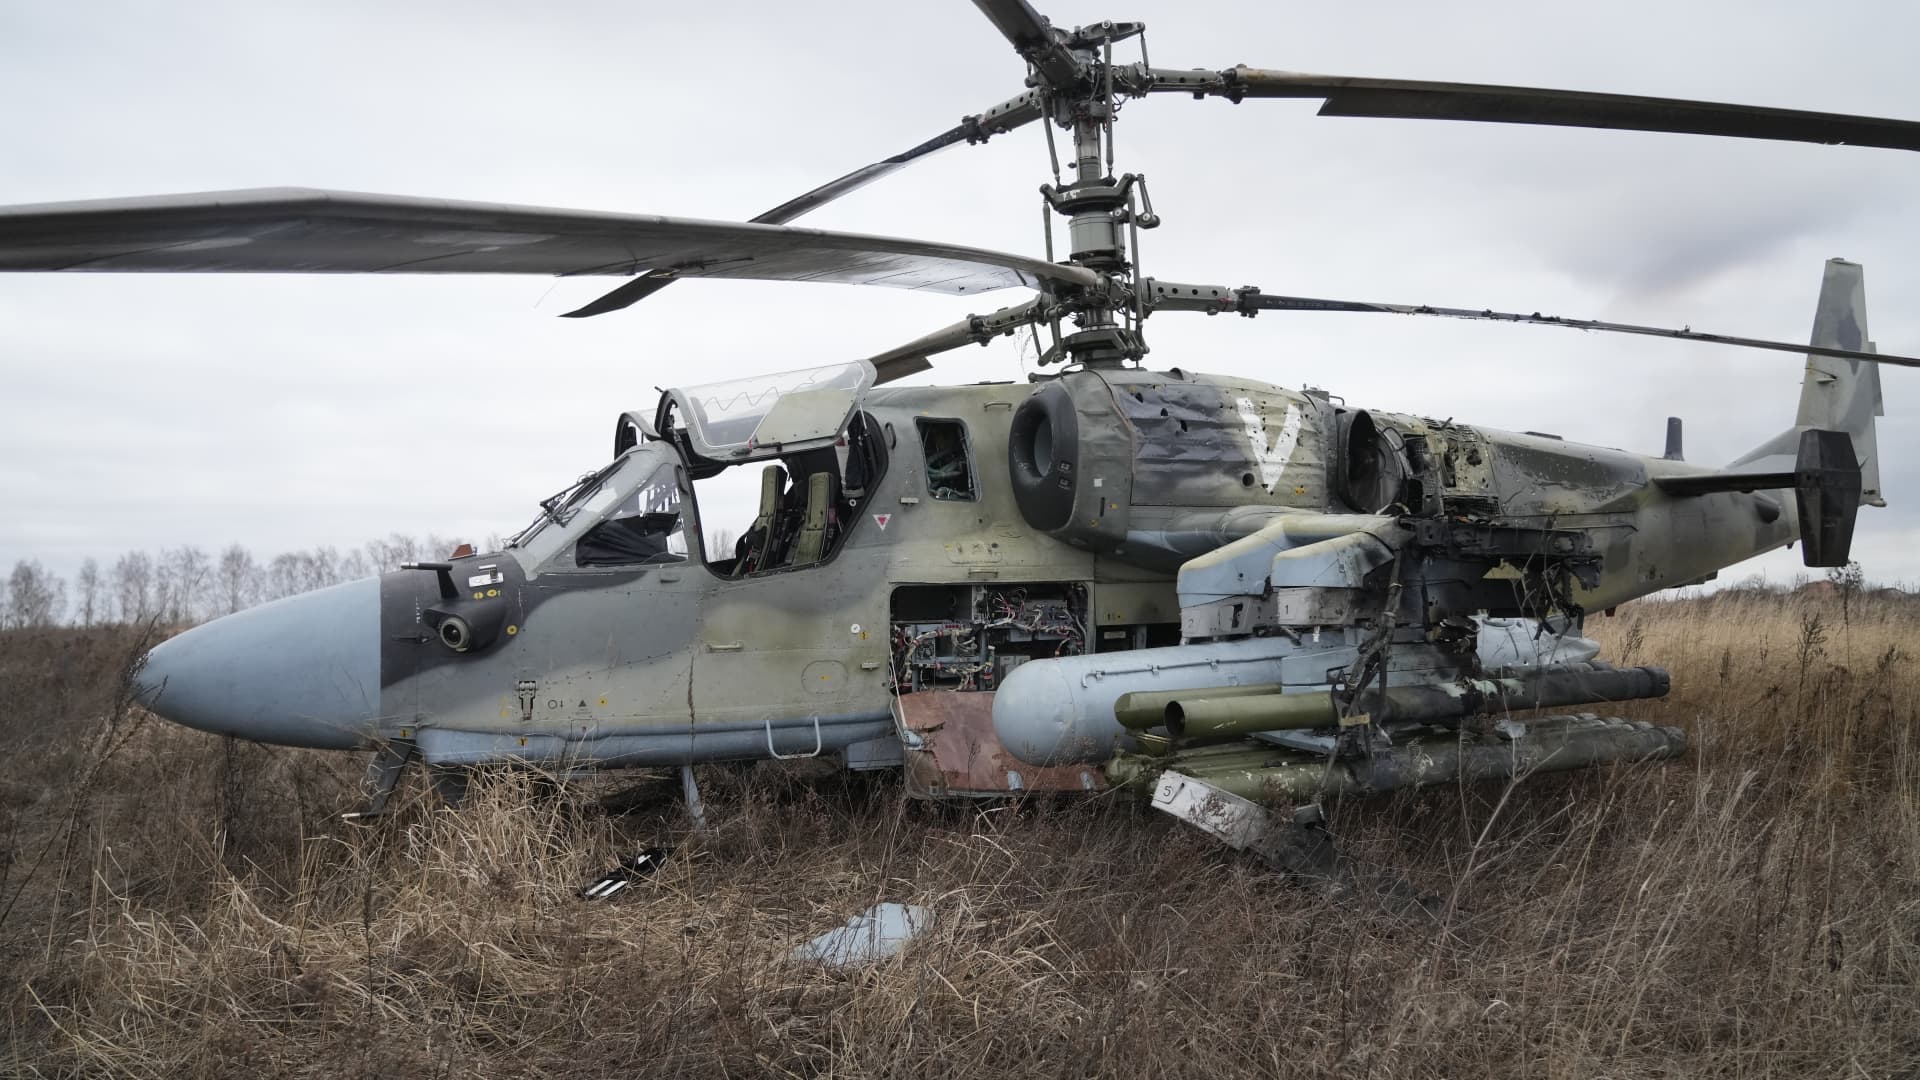 A Russian Ka-52 helicopter gunship is seen in the field after a forced landing outside Kyiv, Ukraine, Thursday, Feb. 24, 2022.